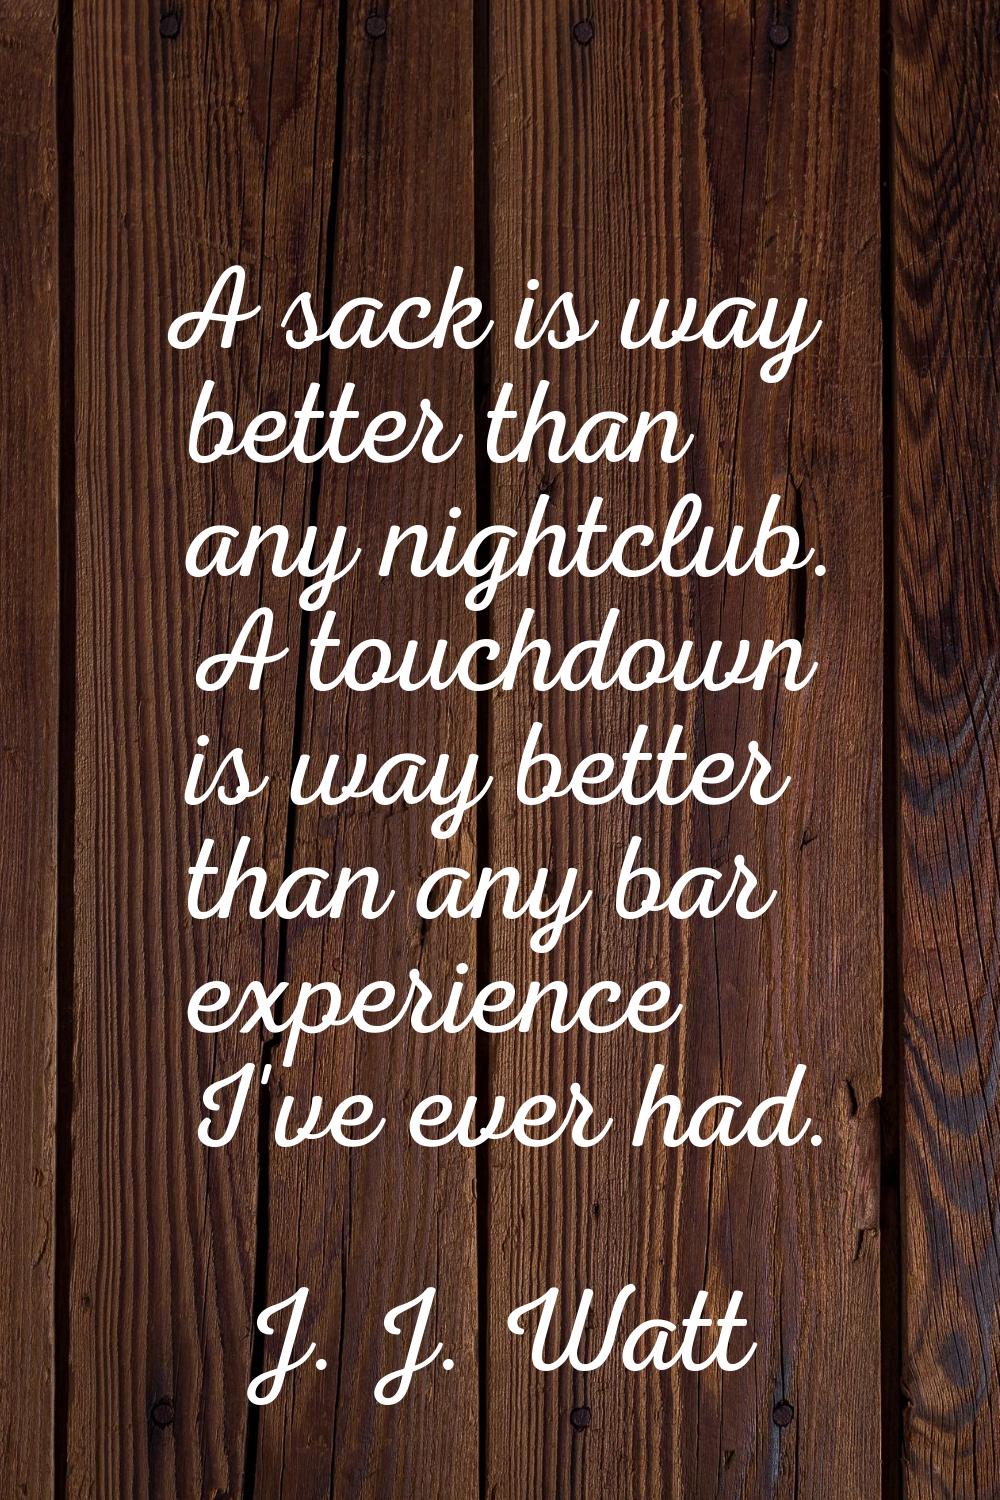 A sack is way better than any nightclub. A touchdown is way better than any bar experience I've eve